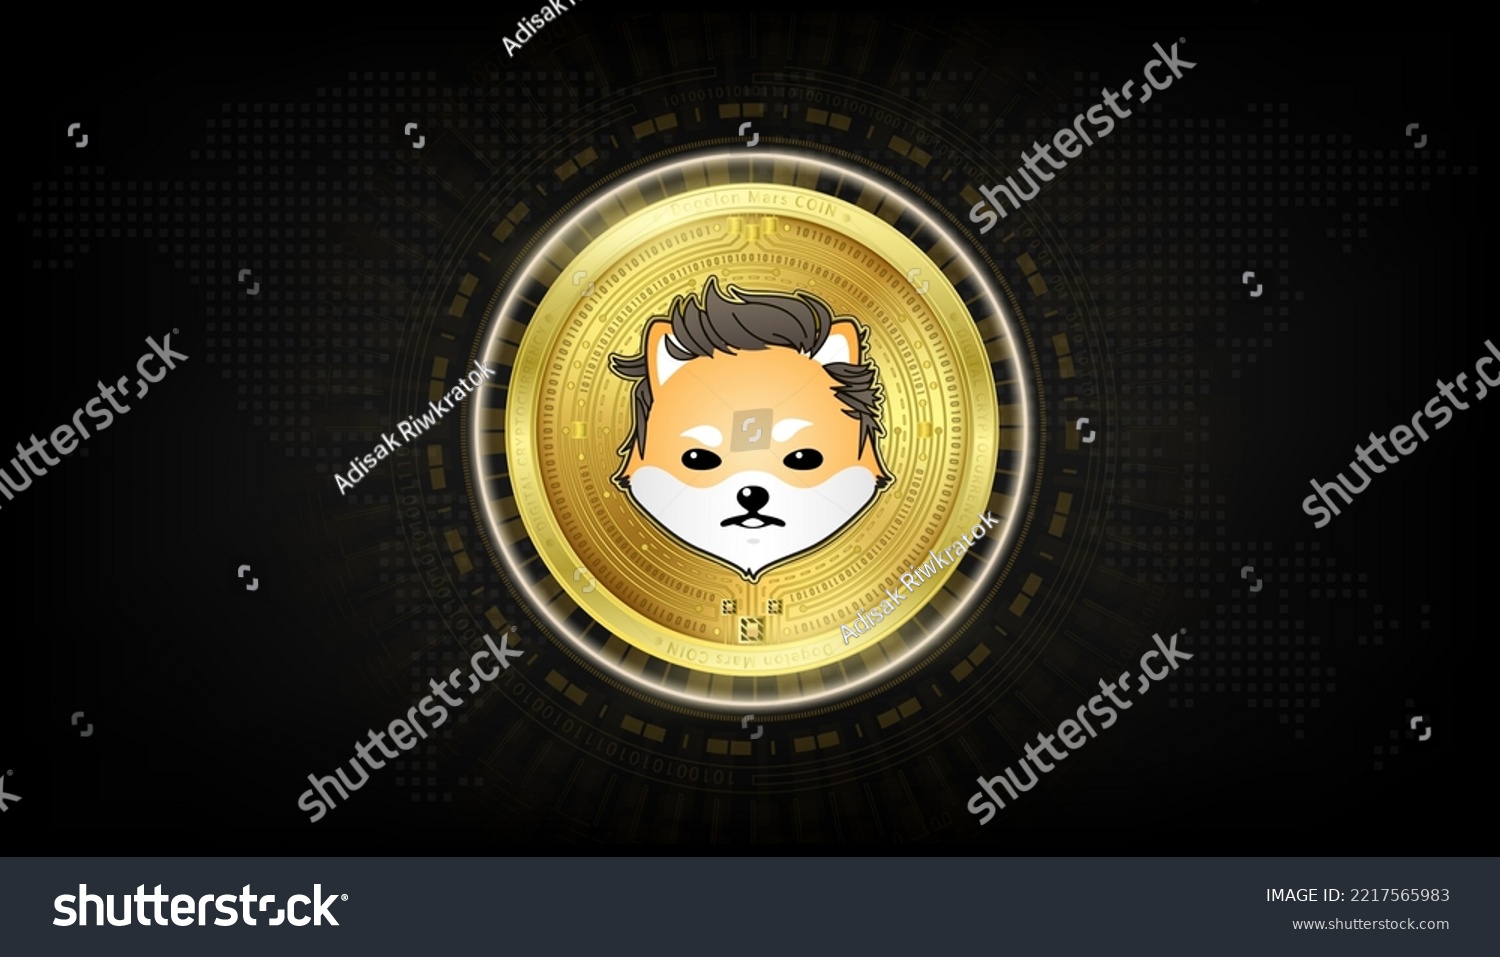 SVG of Dogelon Mars coin golden token cryptocurrency. Future currency on blockchain stock market digital. Crypto currencies on black background vector EPS10. svg